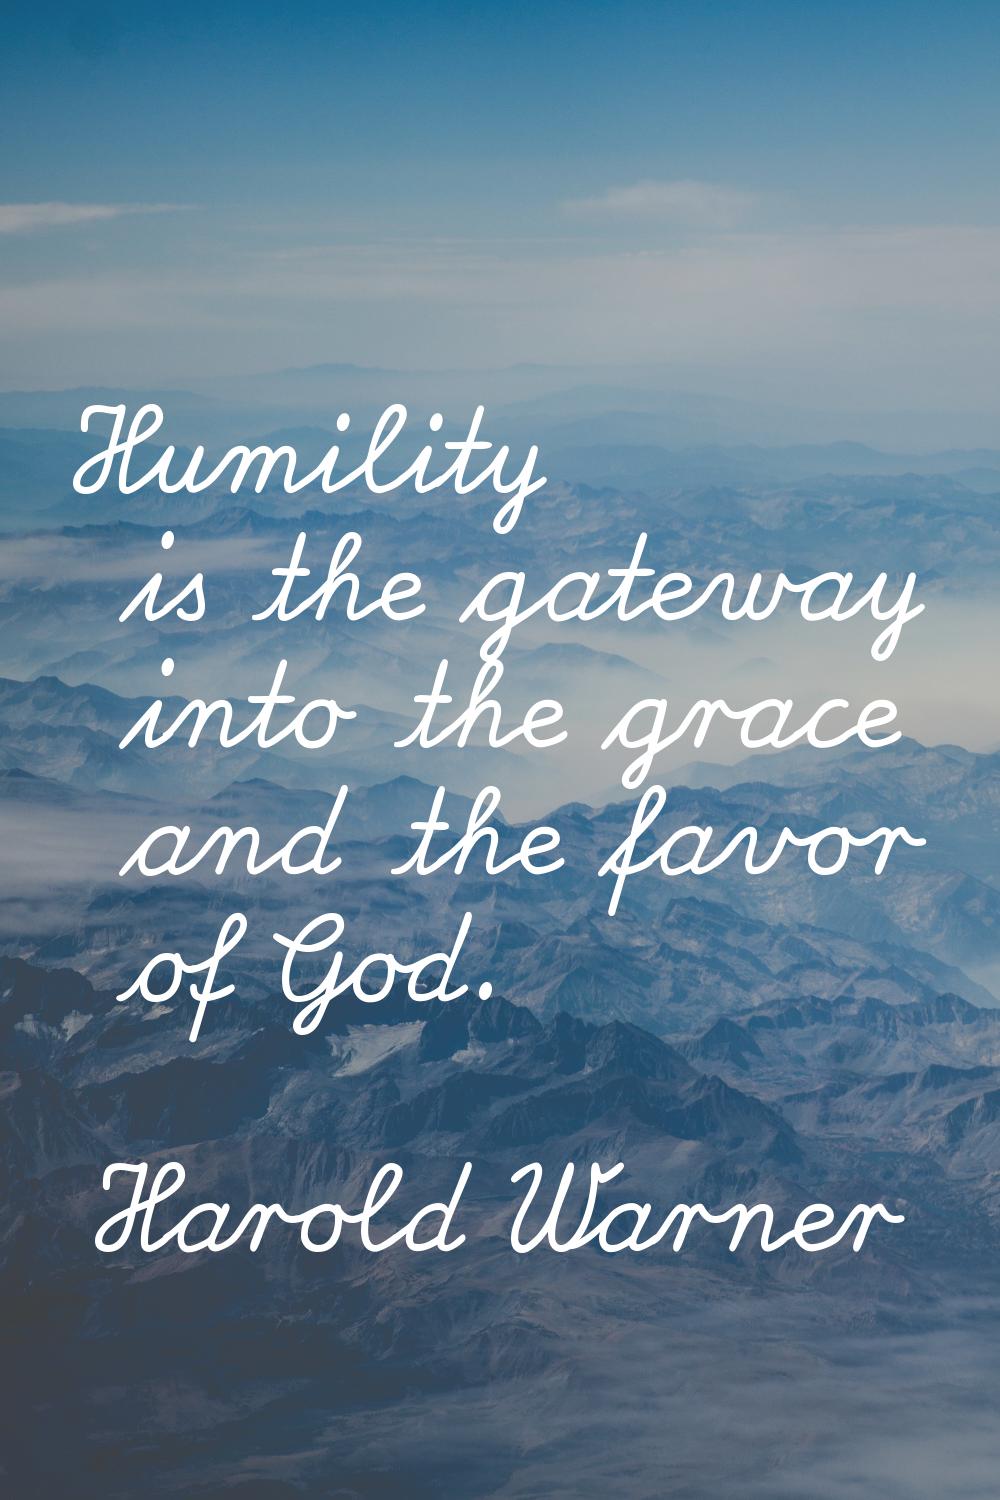 Humility is the gateway into the grace and the favor of God.